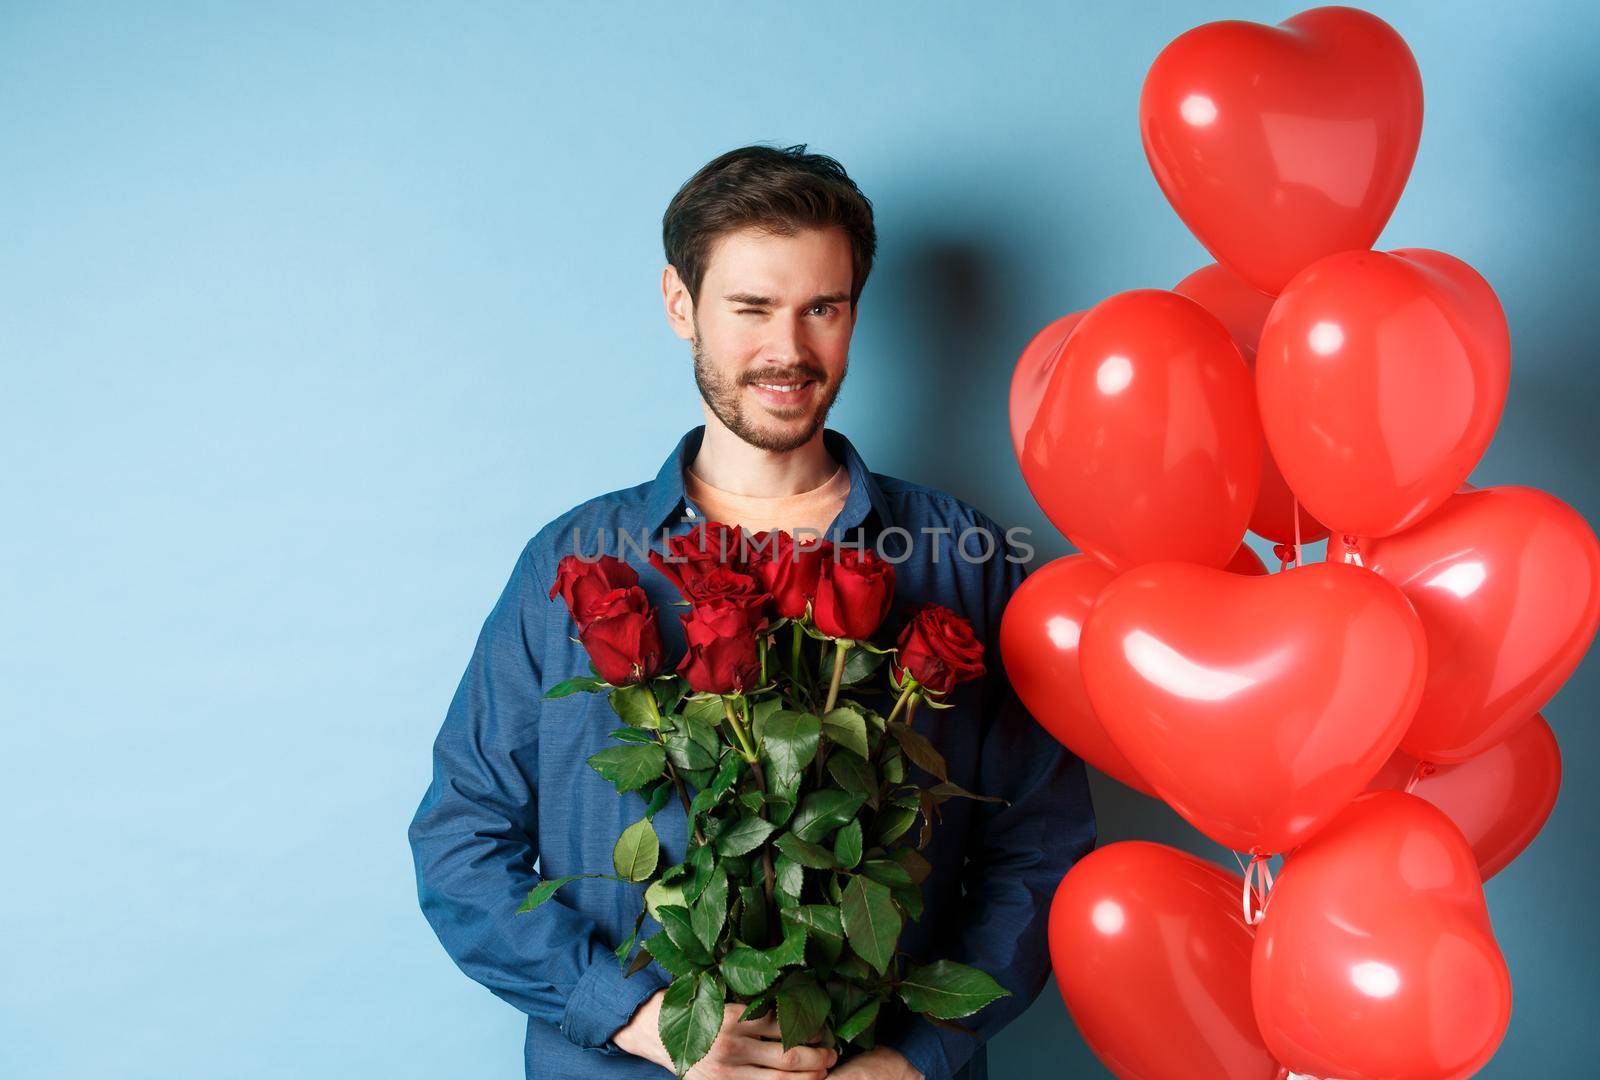 Romantic boyfriend winking and smiling, holding bouquet of flowers on Valentines day, standing near heart balloons for lover, blue background.